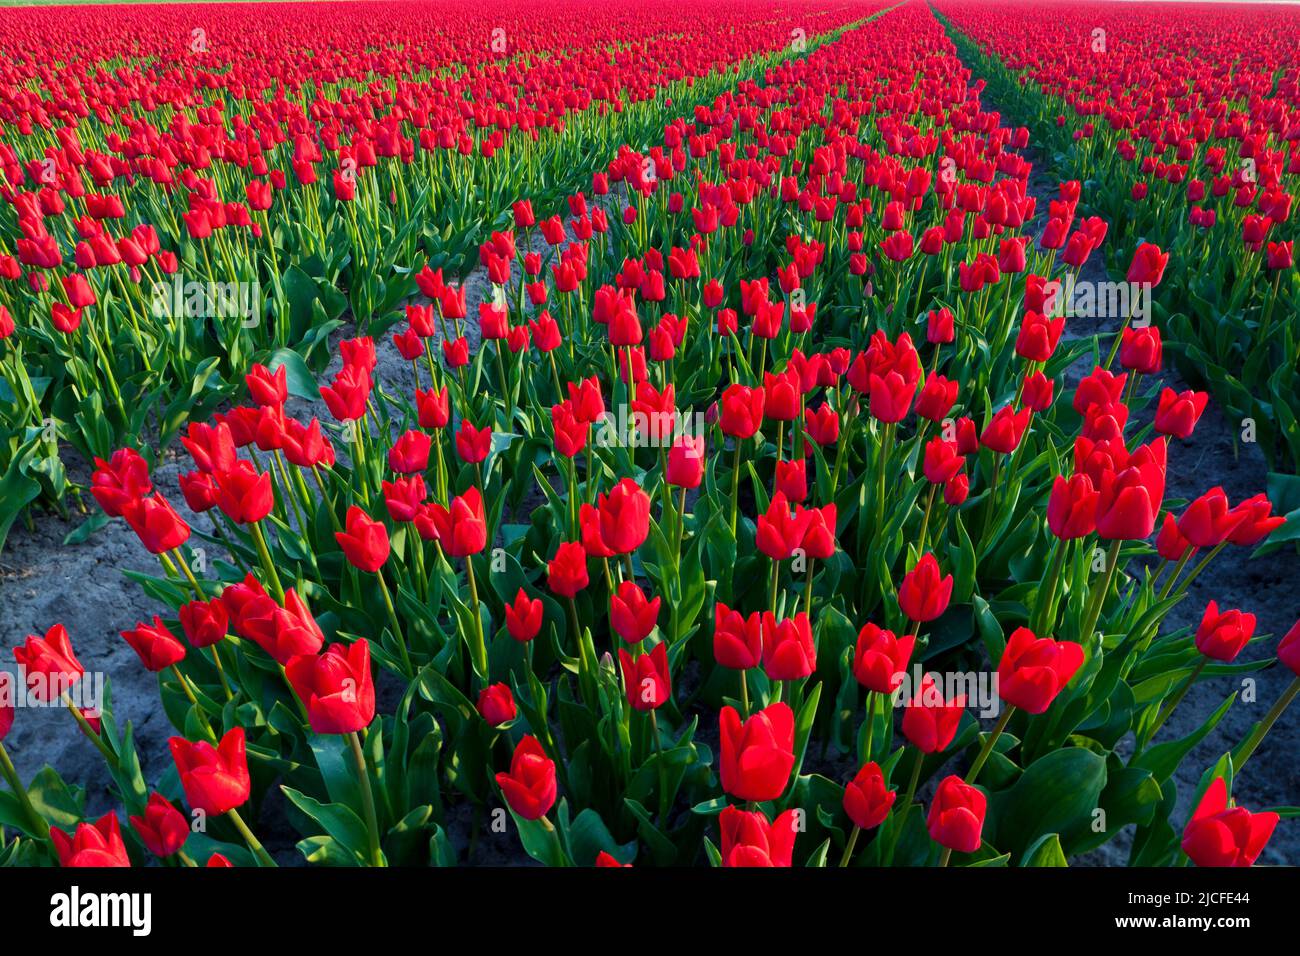 Rows of Tulips in a field, North Holland, Netherlands Stock Photo